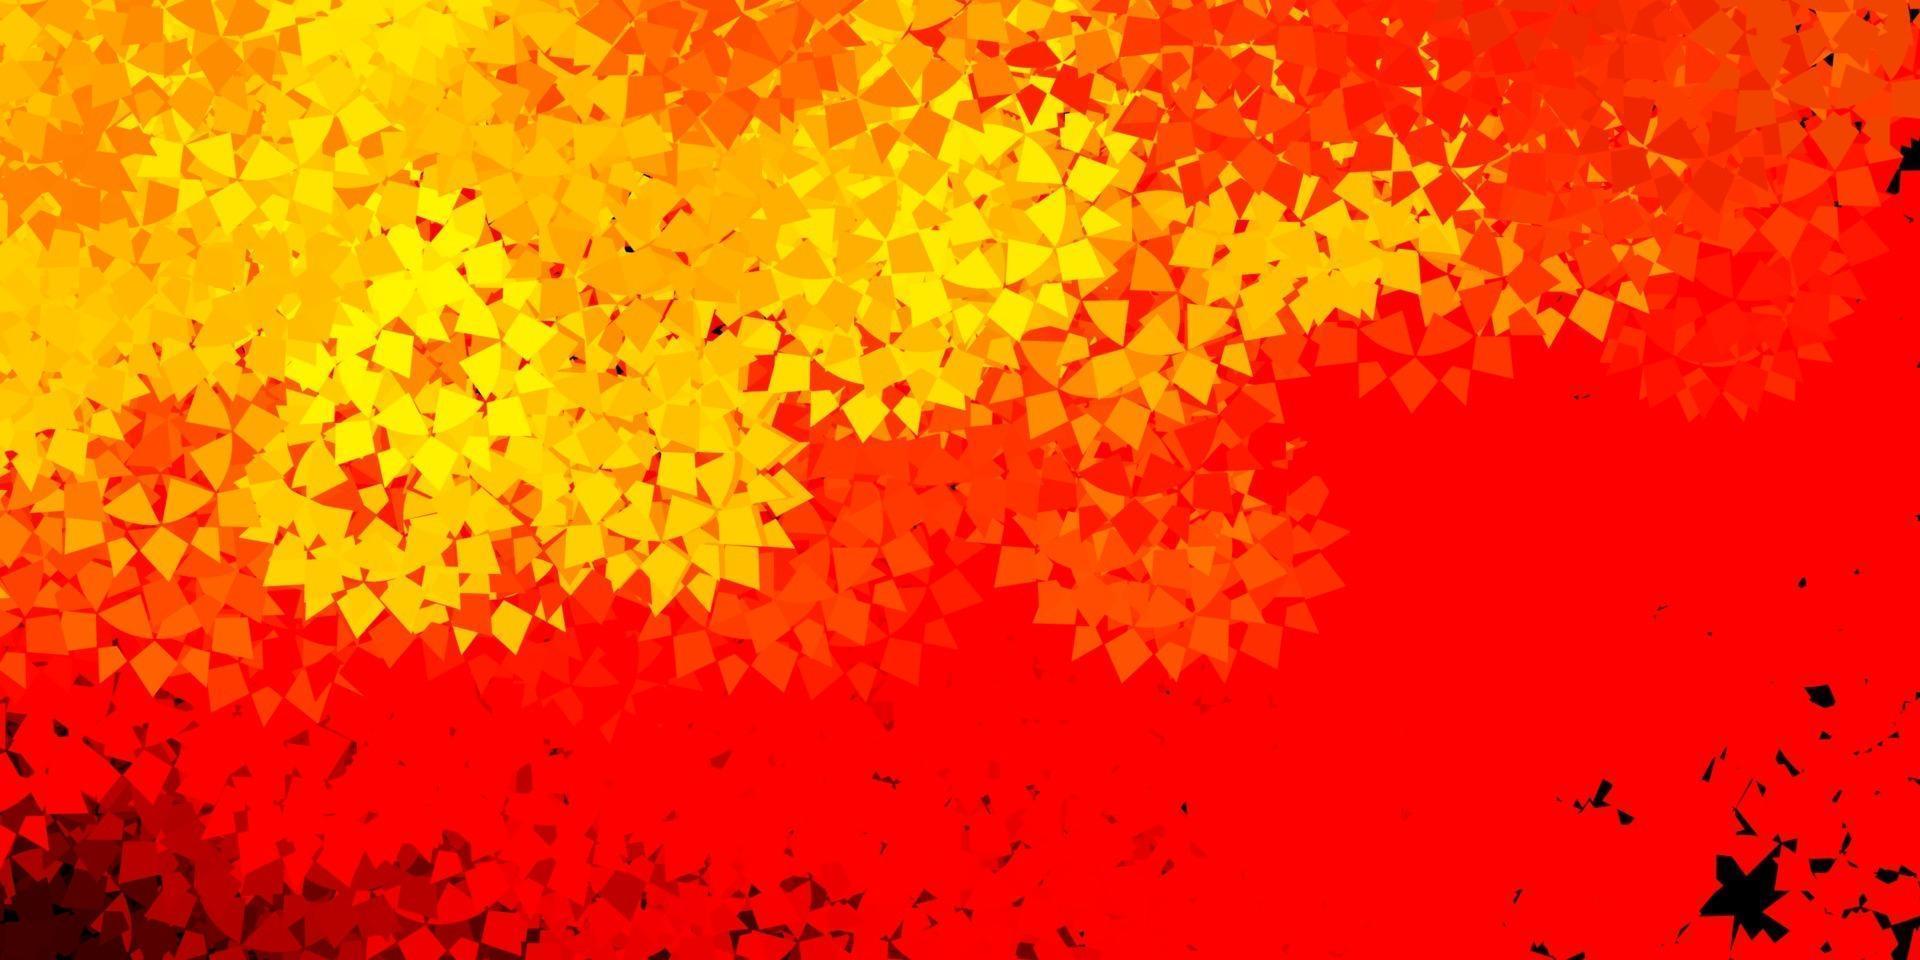 Light red, yellow vector background with polygonal forms.